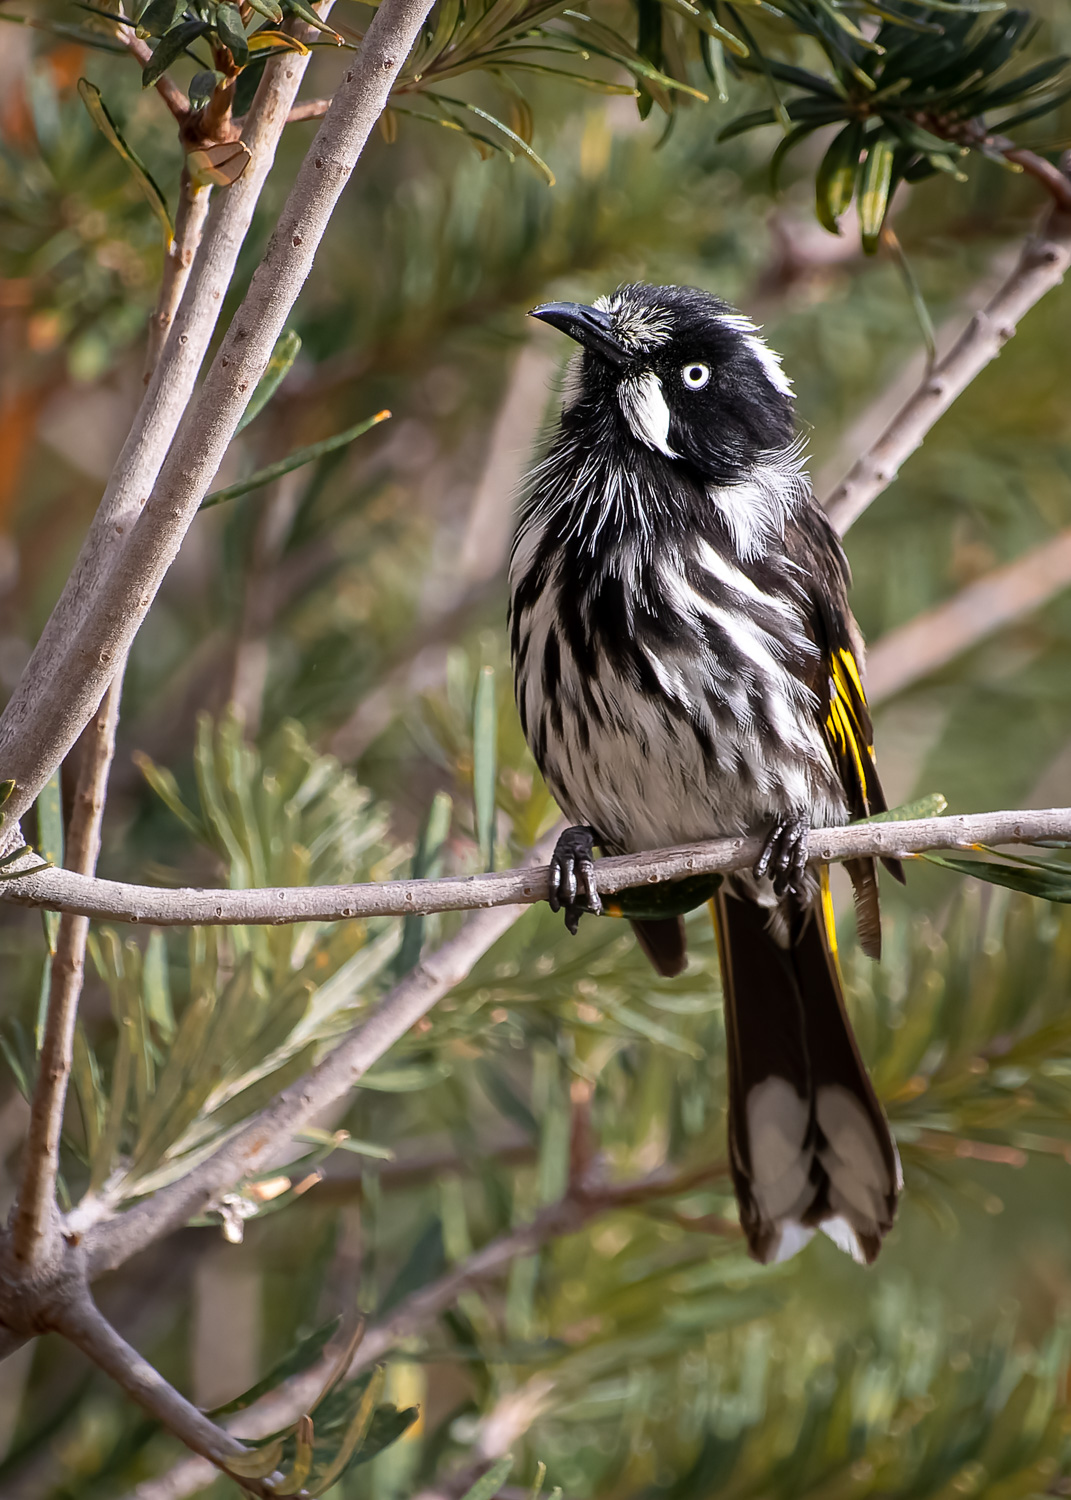 A small black and white bird with yellow on its wings and a very long black beak and white eye perched in a tree